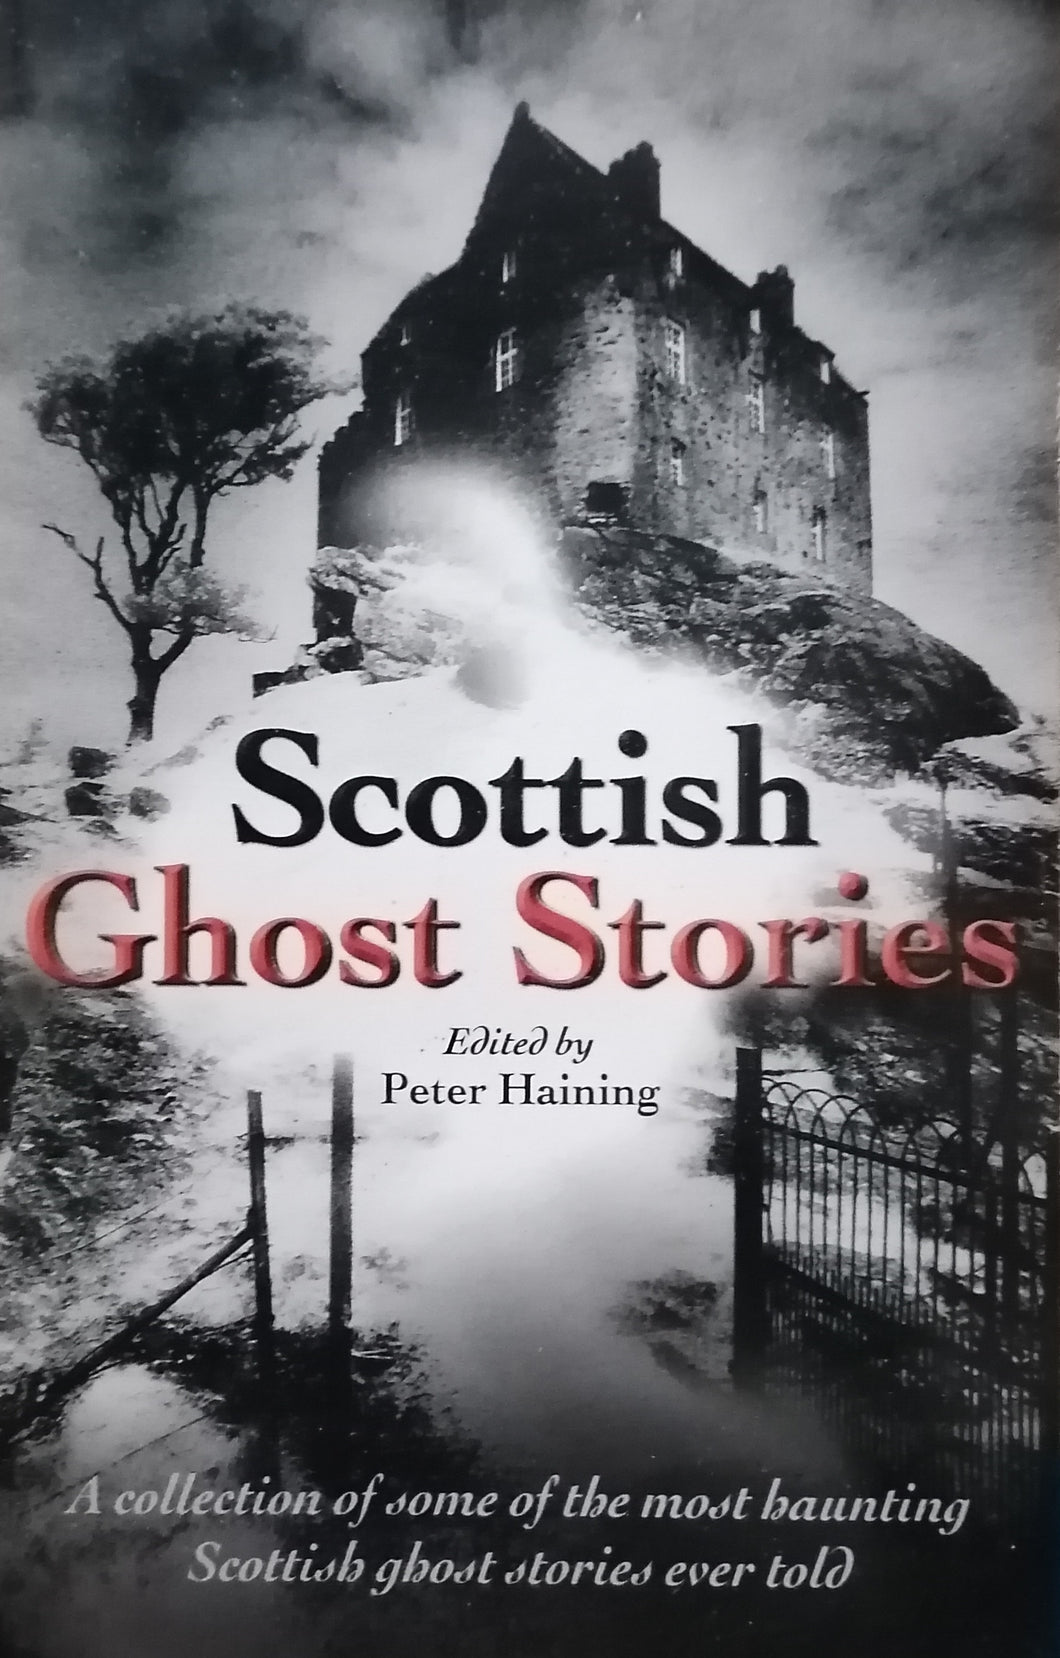 Scottish Ghost Stories by Peter Haining